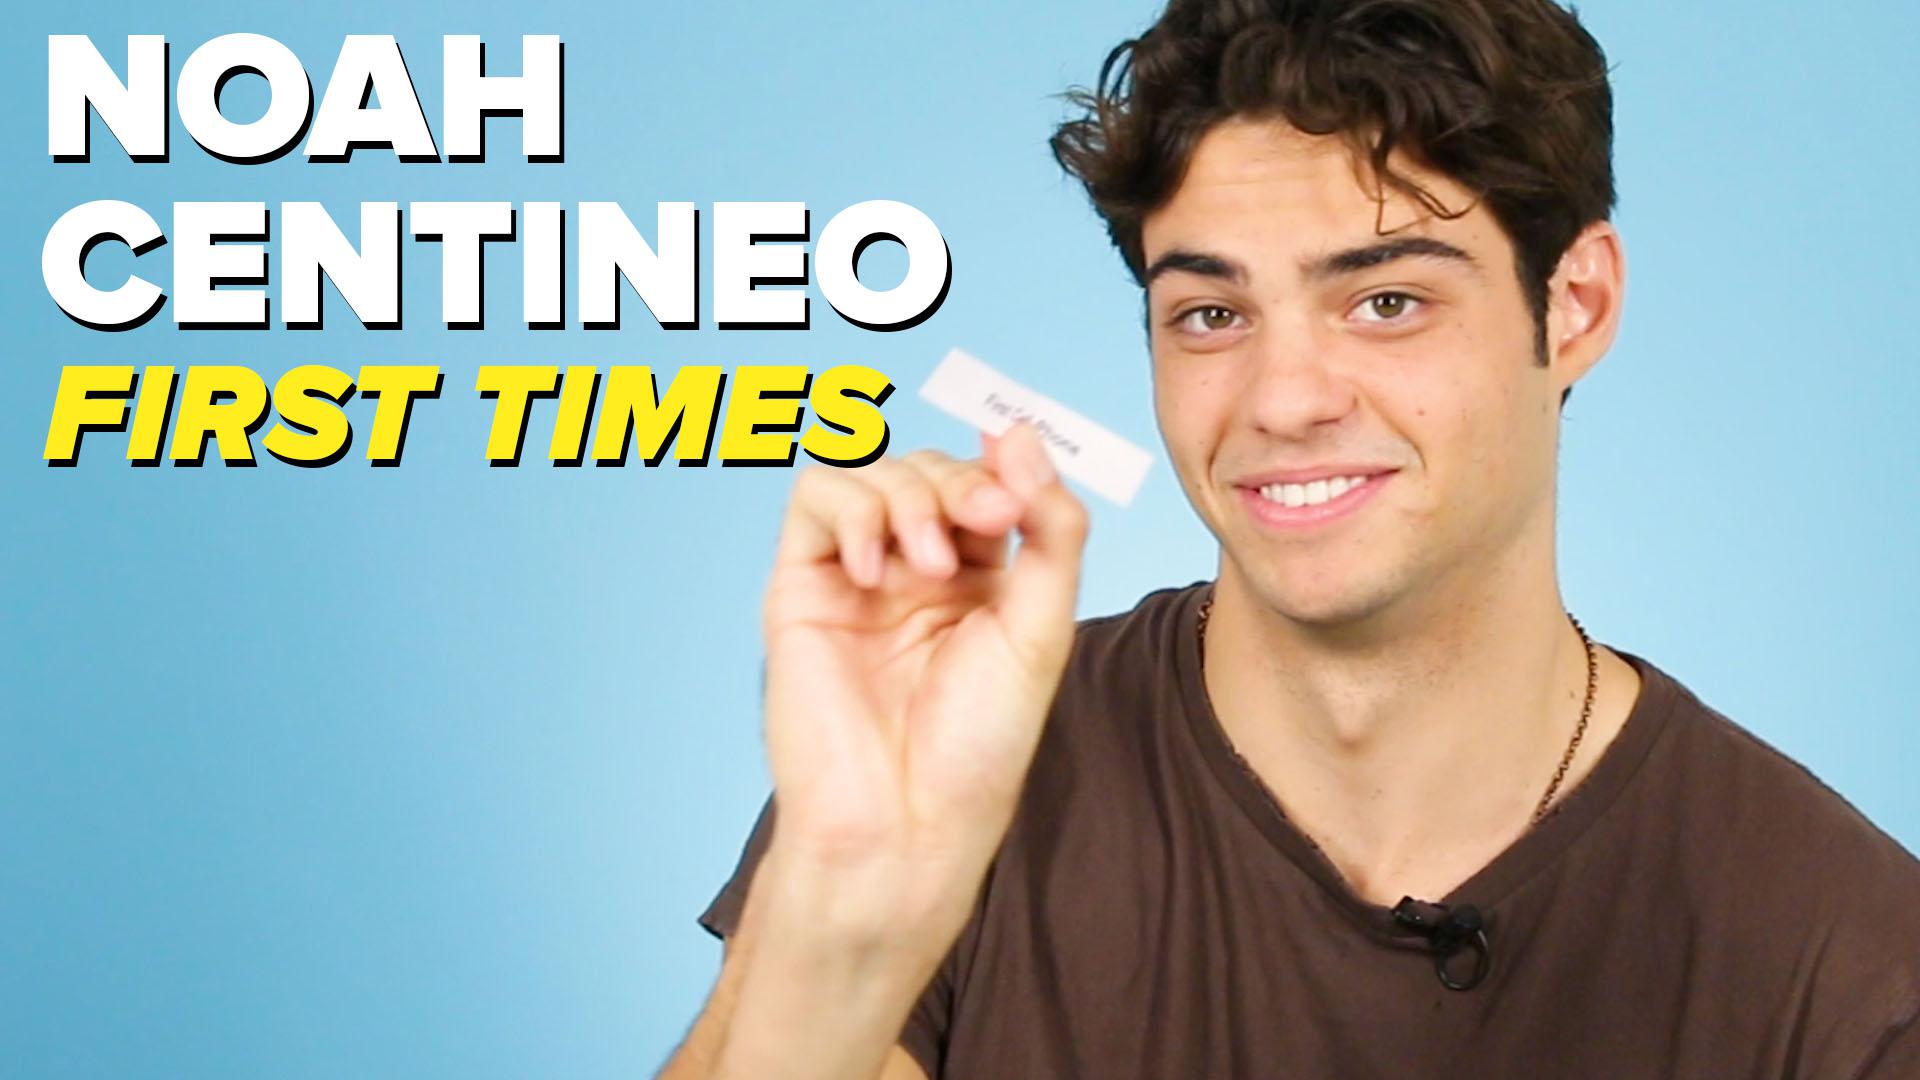 BuzzFeed Video - Noah Centineo Tells Us About His First Times1920 x 1080